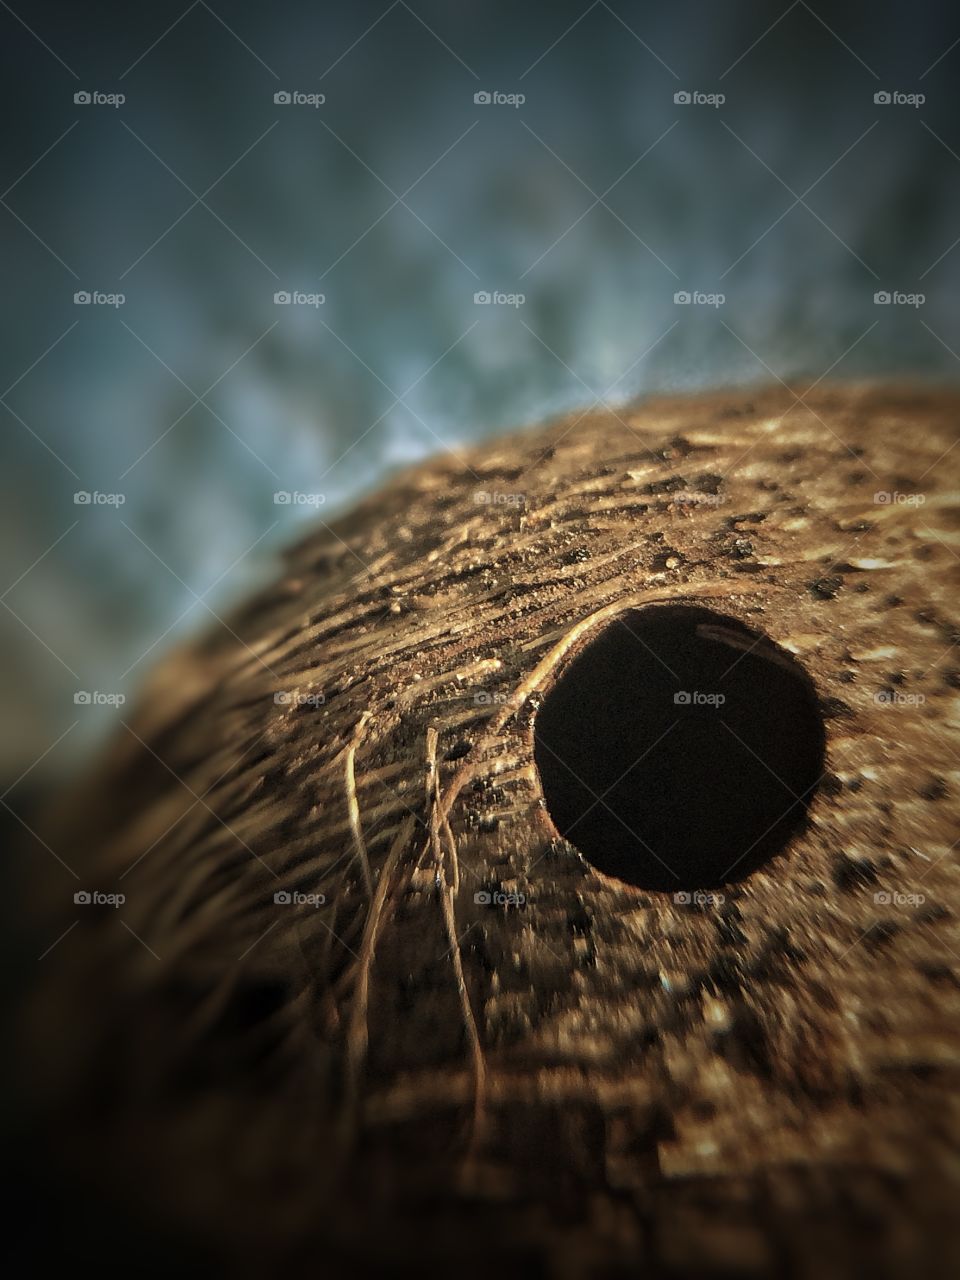 Little hole in small coconut | Photo with iPhone 5S + Macro lens.